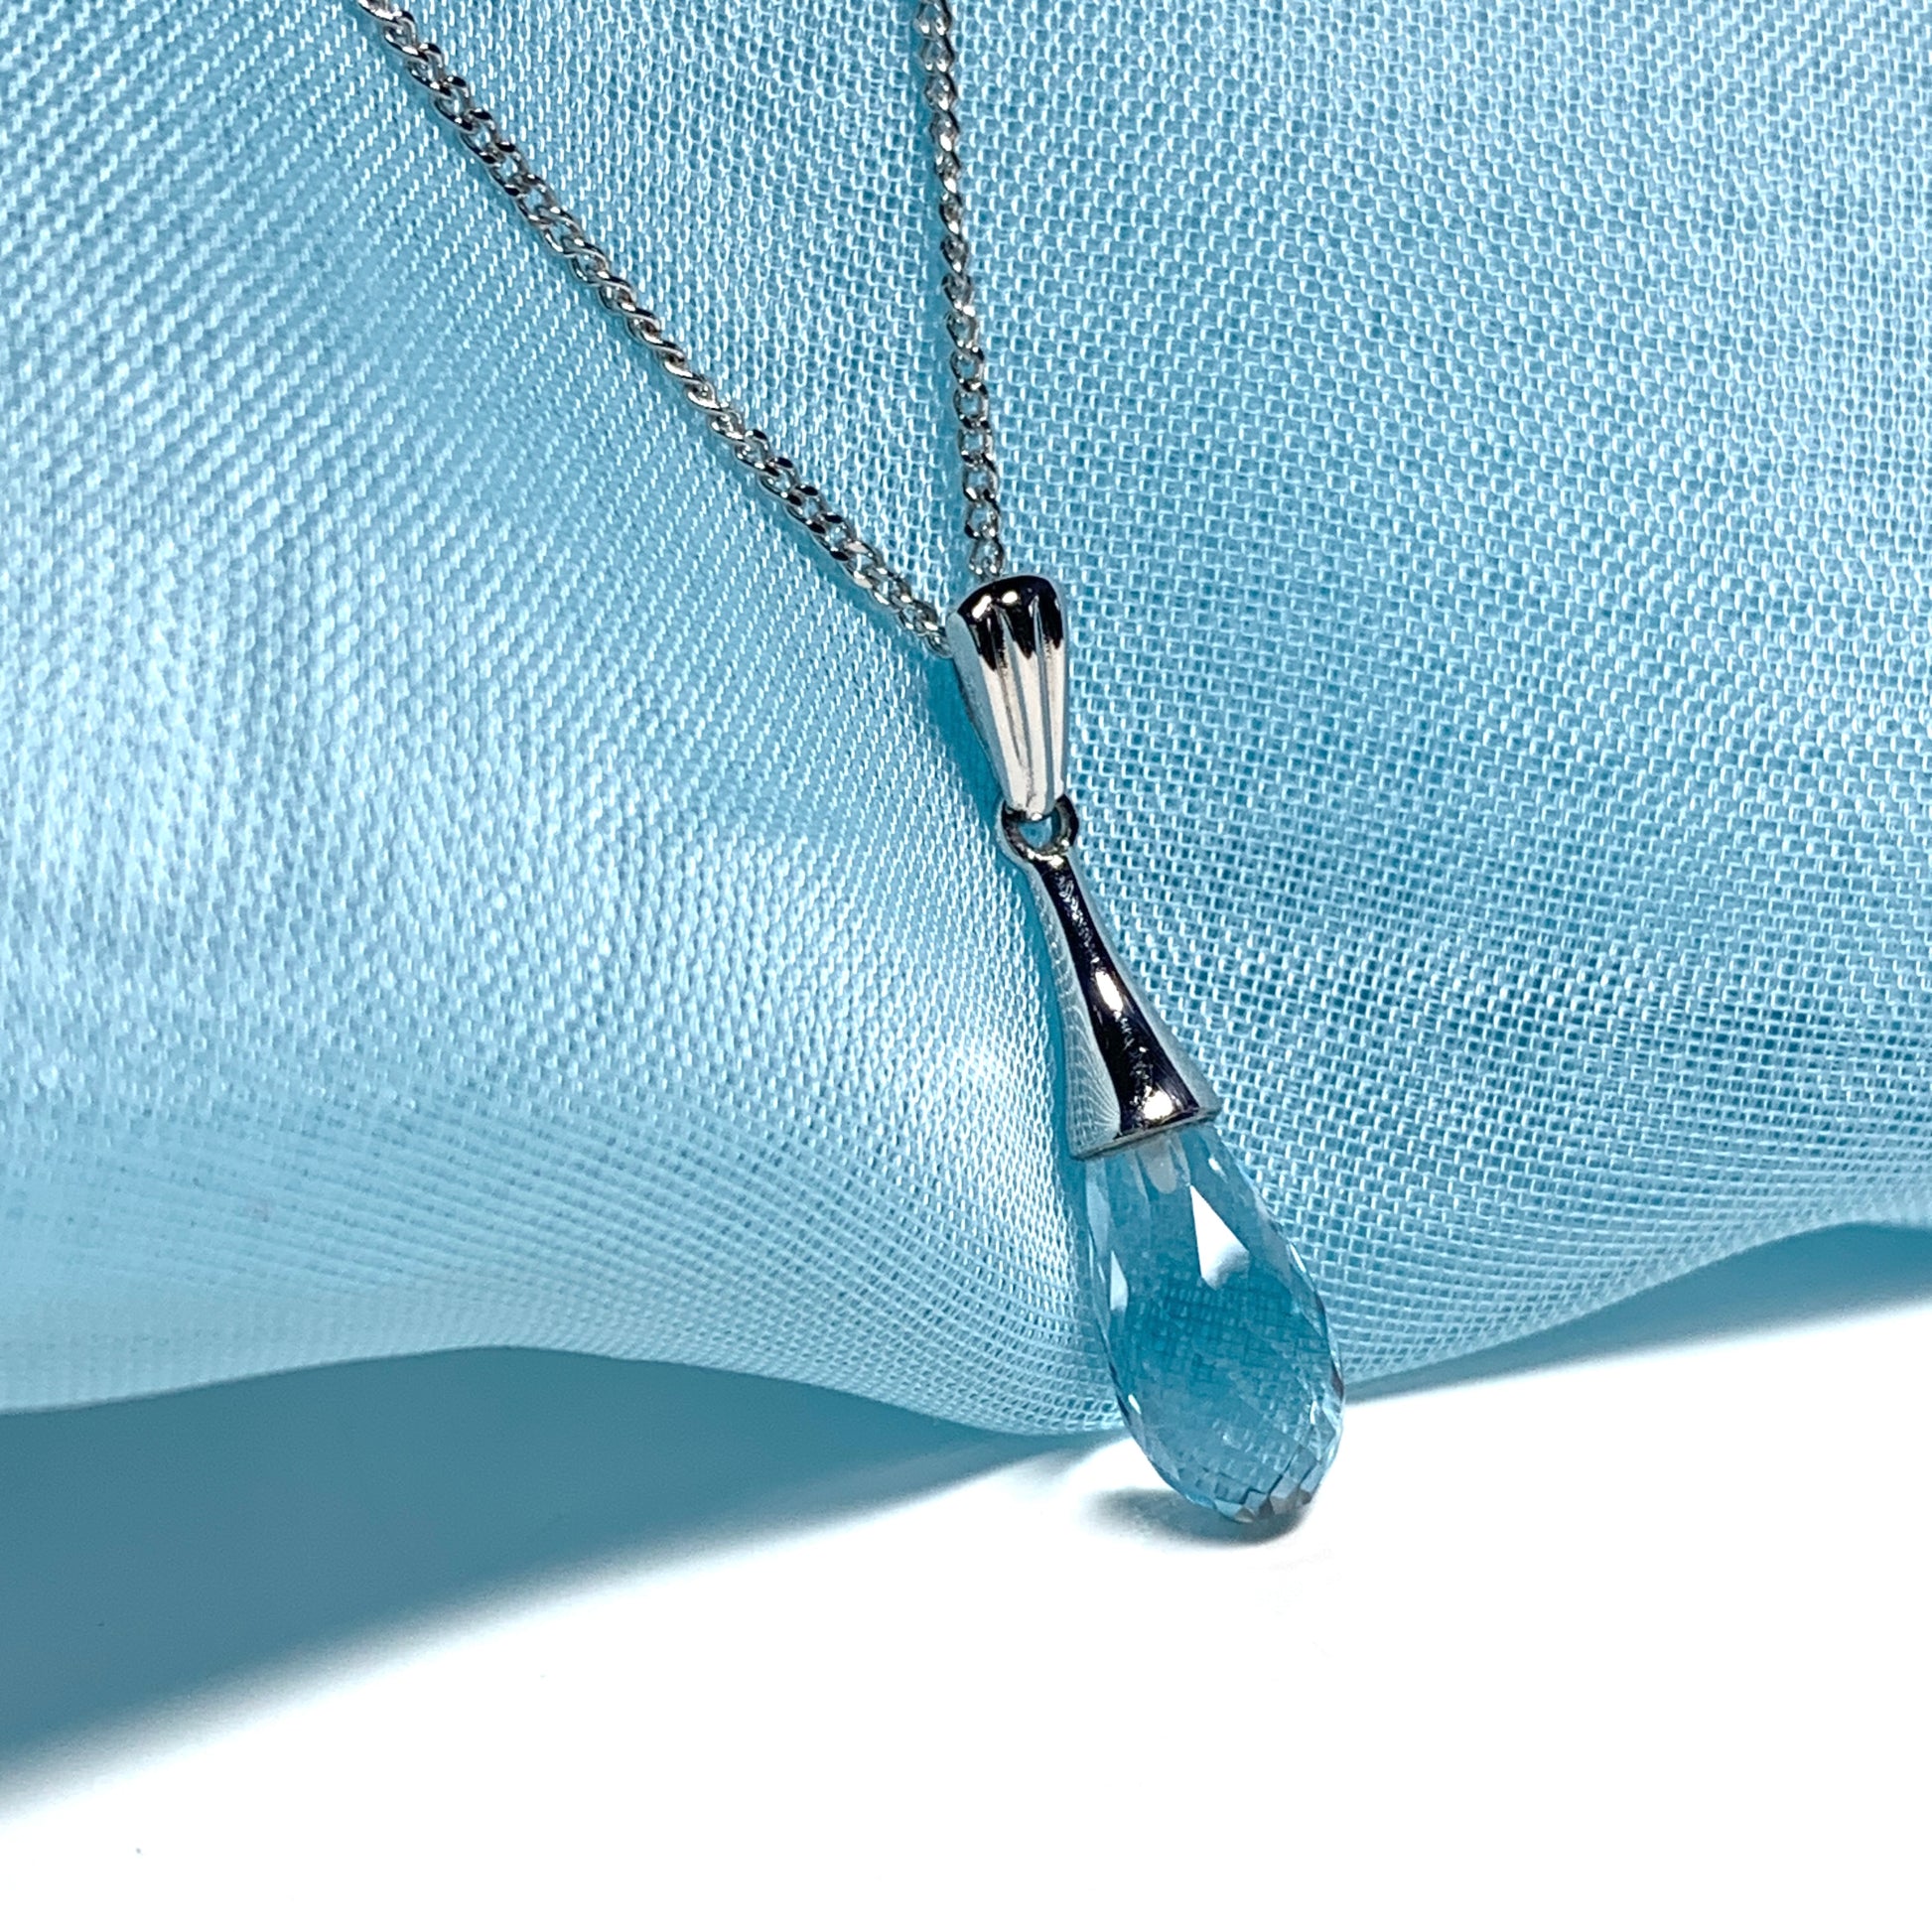 Blue Topaz necklace white gold faceted pendant